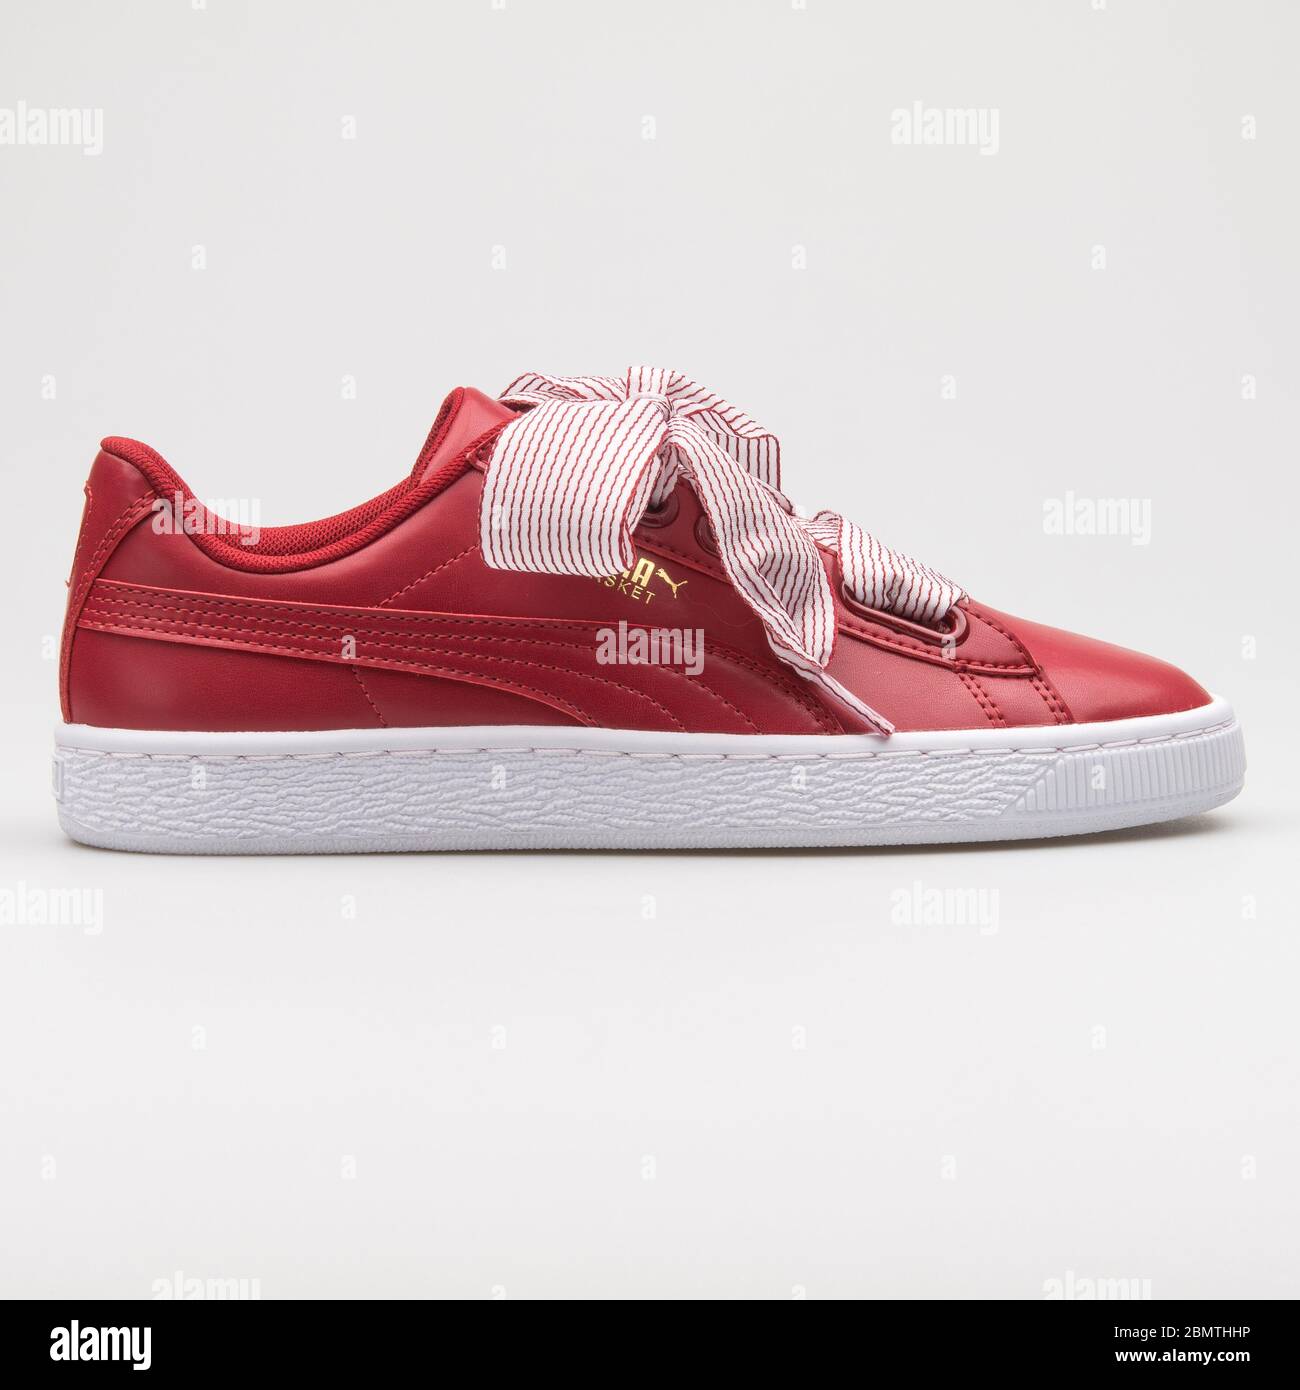 Puma Basket Heart red and white sneaker 